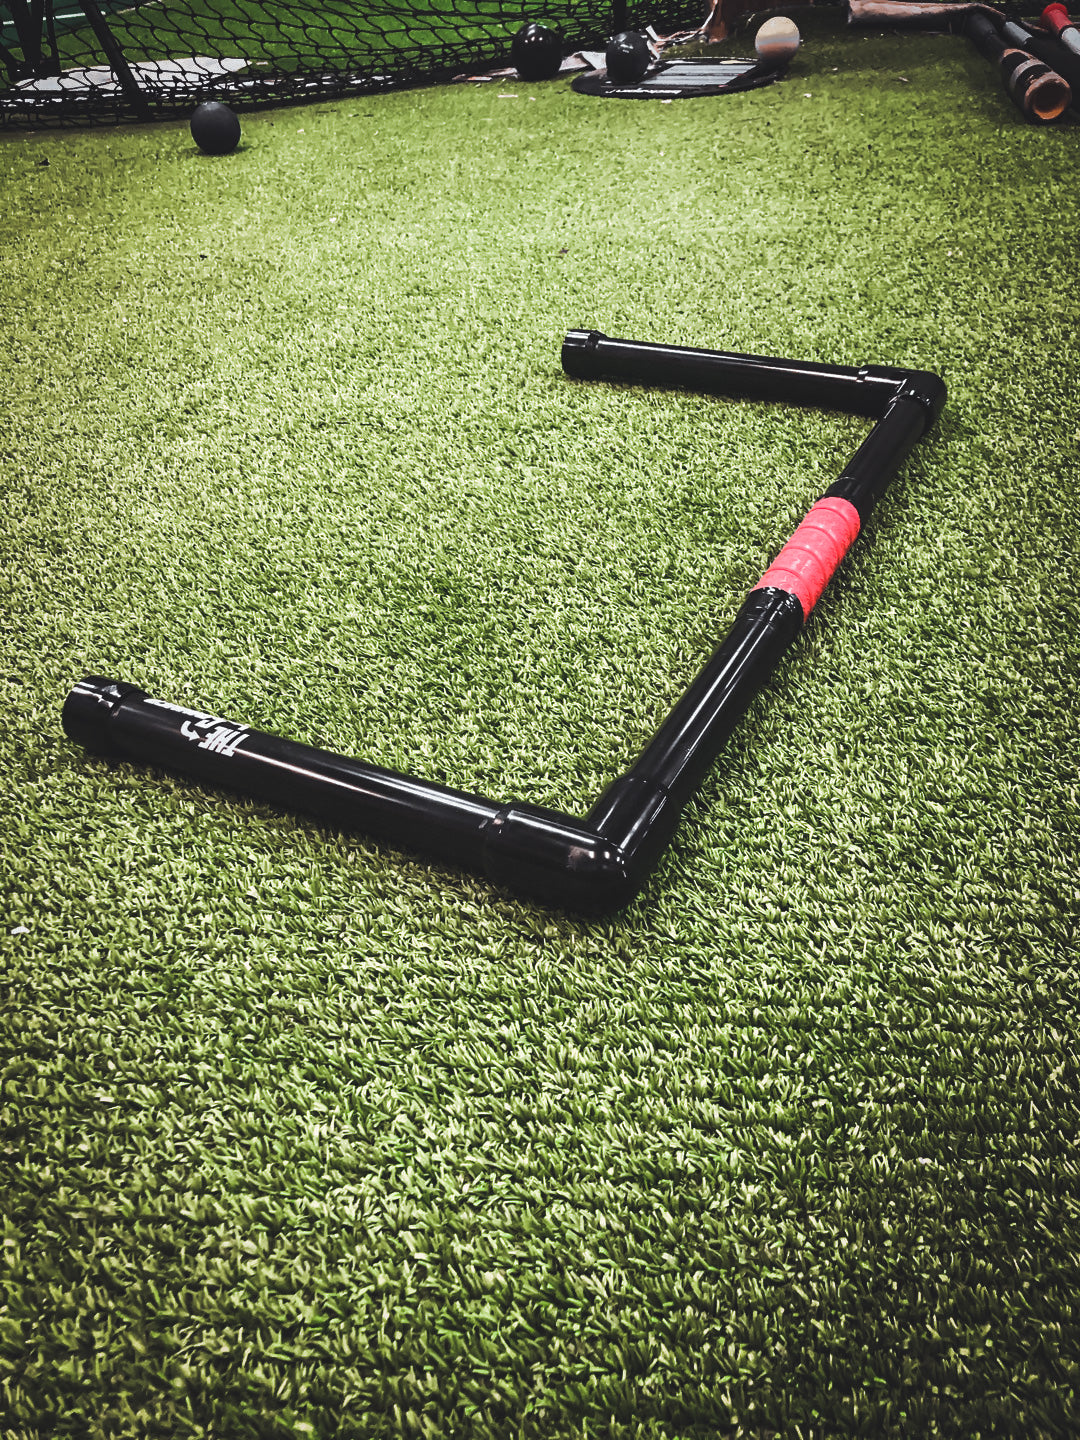 The Shoulder Spinner -  2 lb Warm Up Tool For Your Arms, Shoulders, & Chest All At The Same Time, Great Arm Care Tool For Baseball & Softball Players